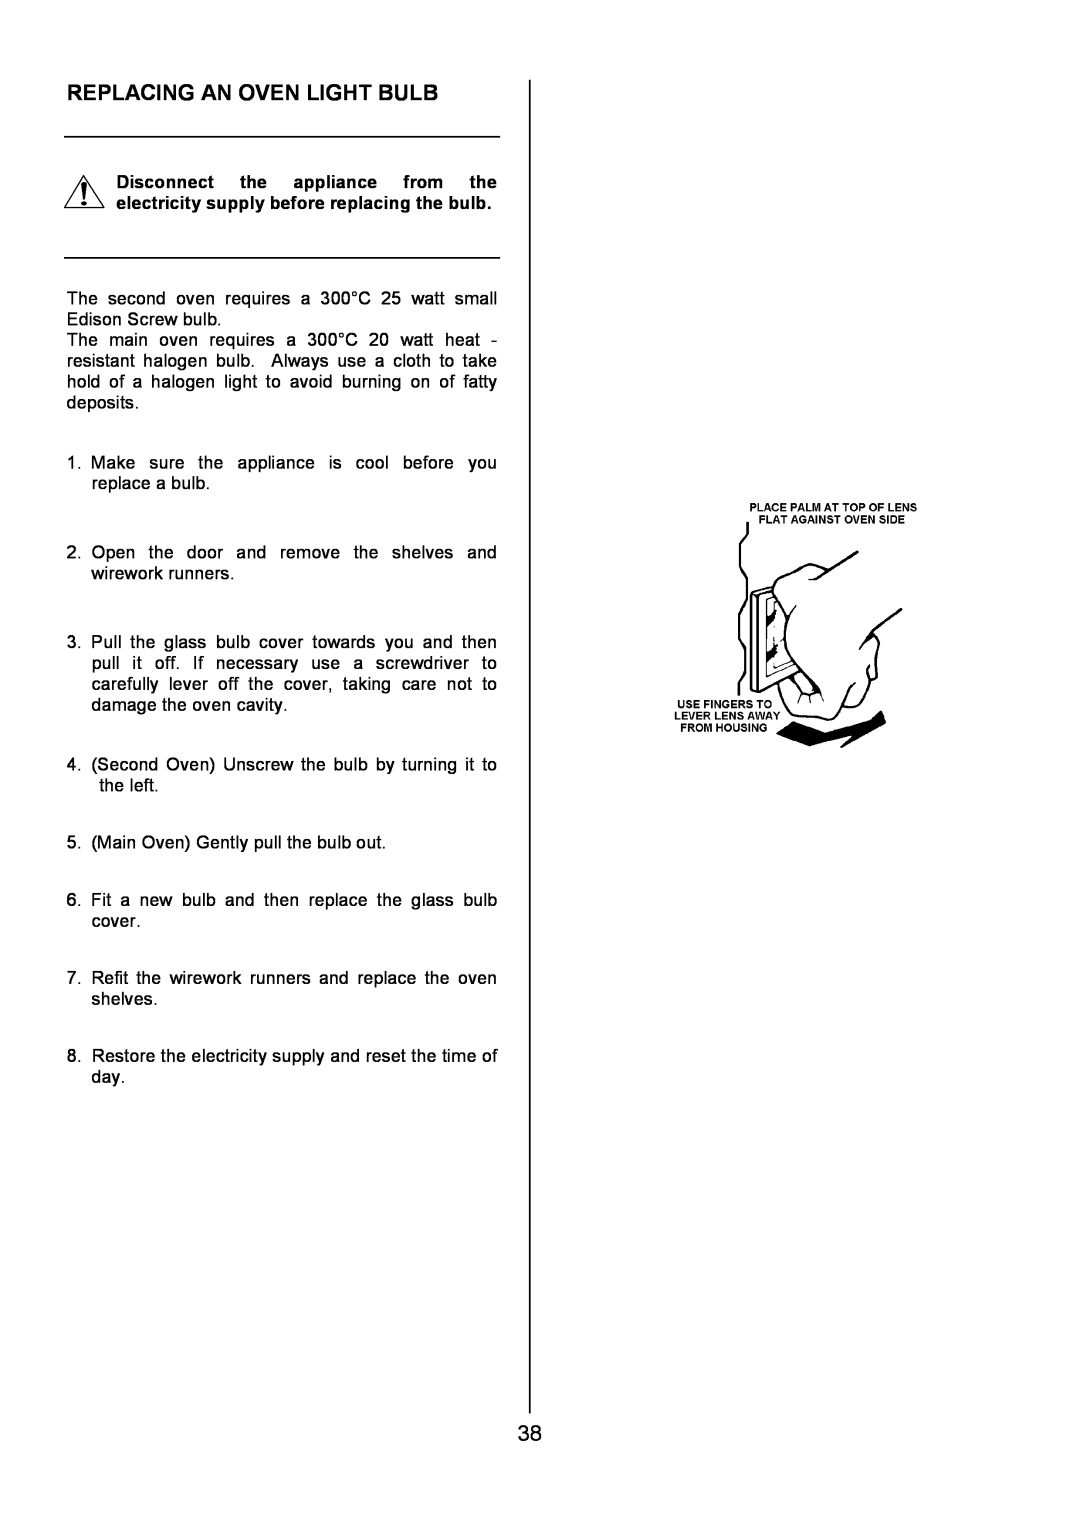 Electrolux U7101-4 operating instructions Replacing An Oven Light Bulb 